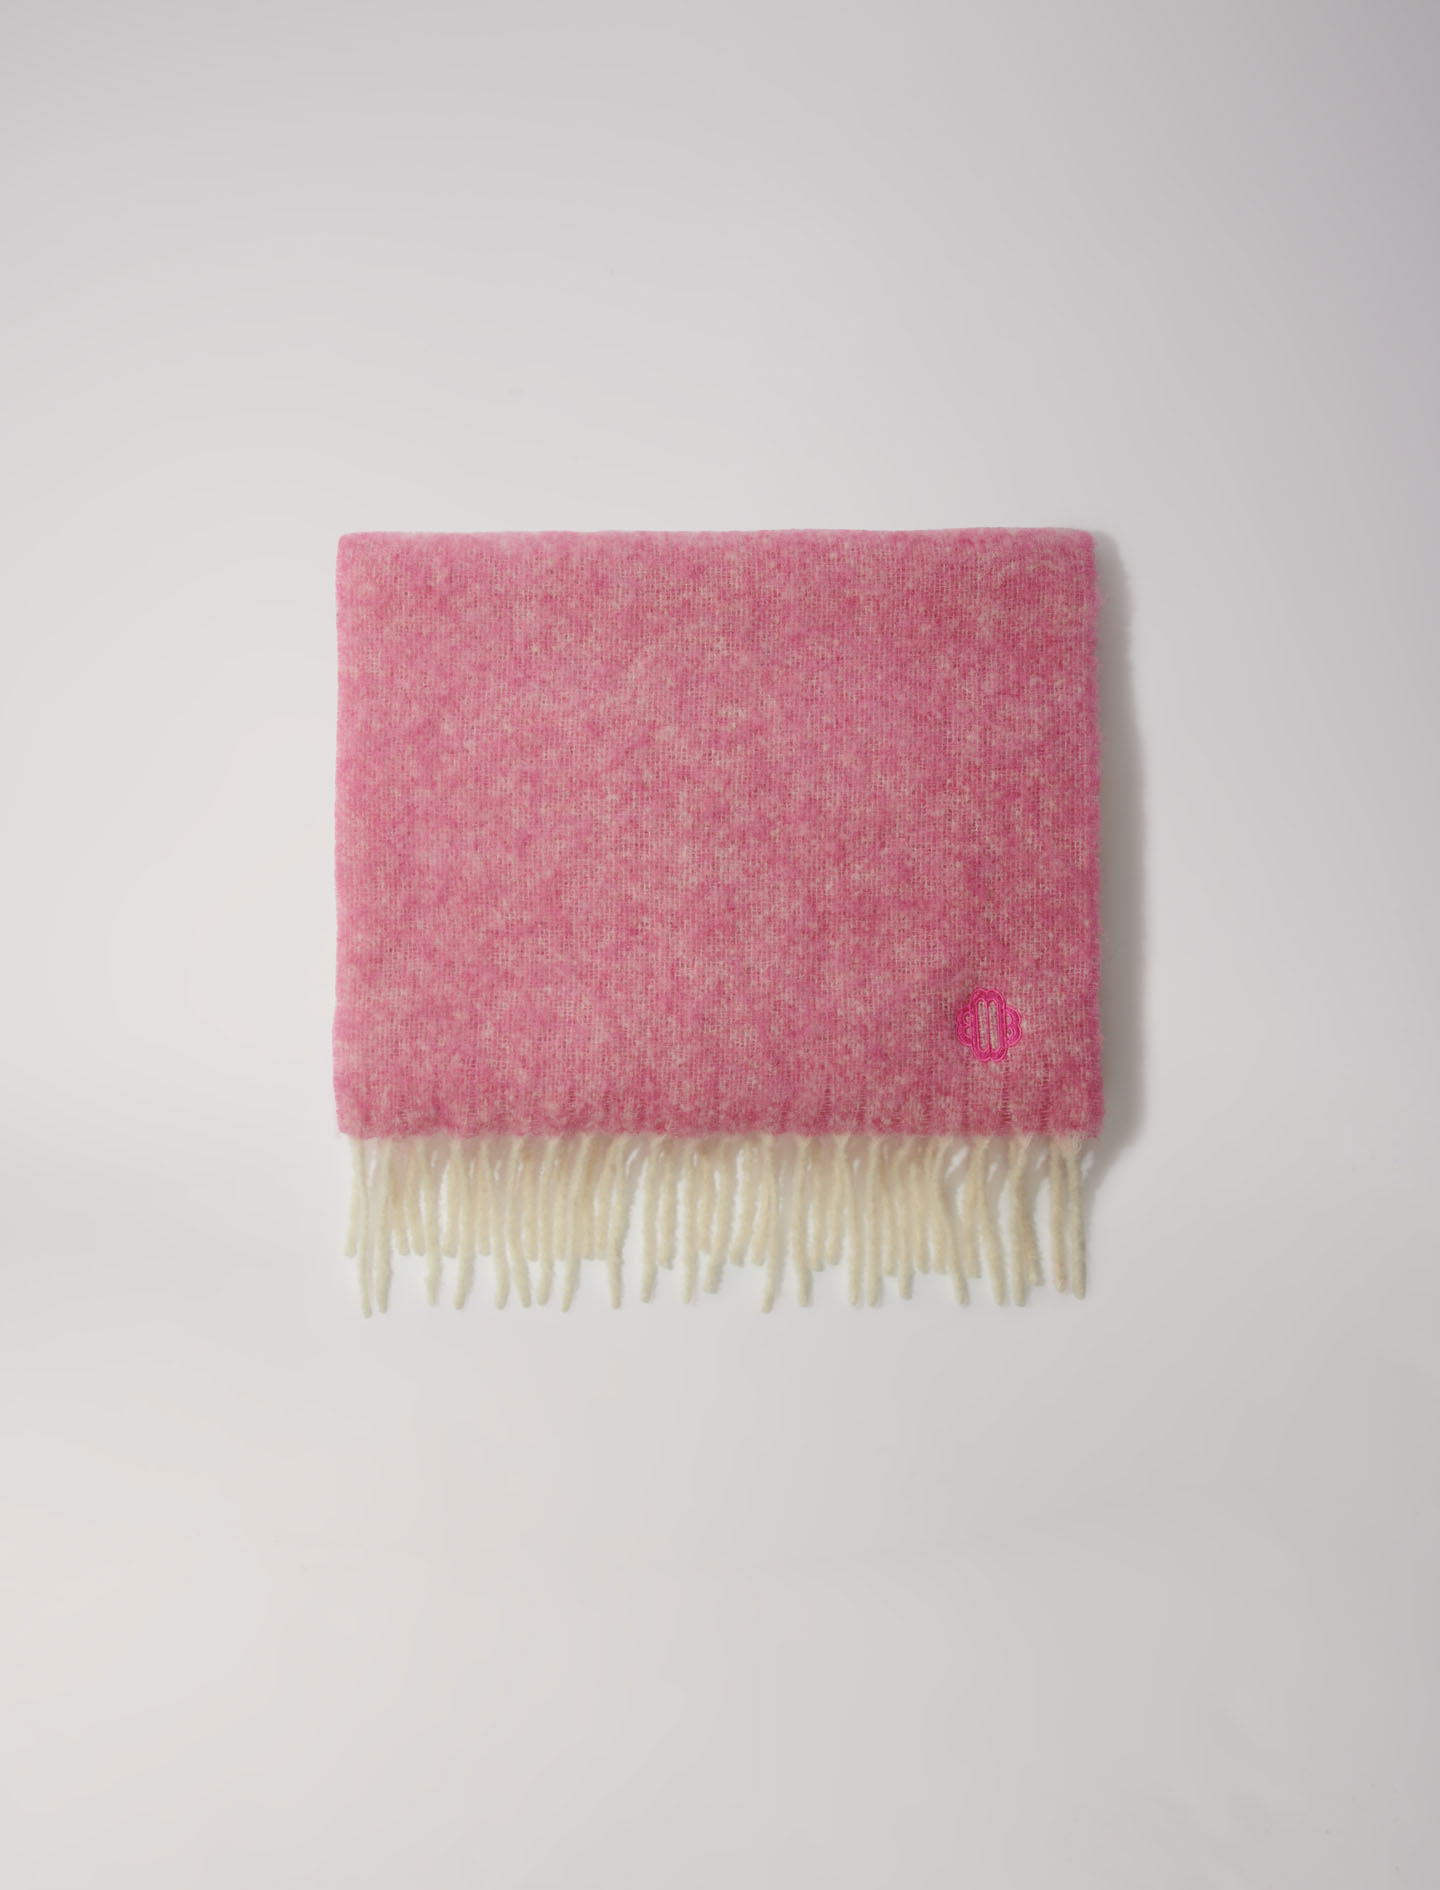 Mixte's wool, Two-tone scarf for Fall/Winter, size Mixte-All Accessories-OS (ONE SIZE), in color Fuchsia / Red